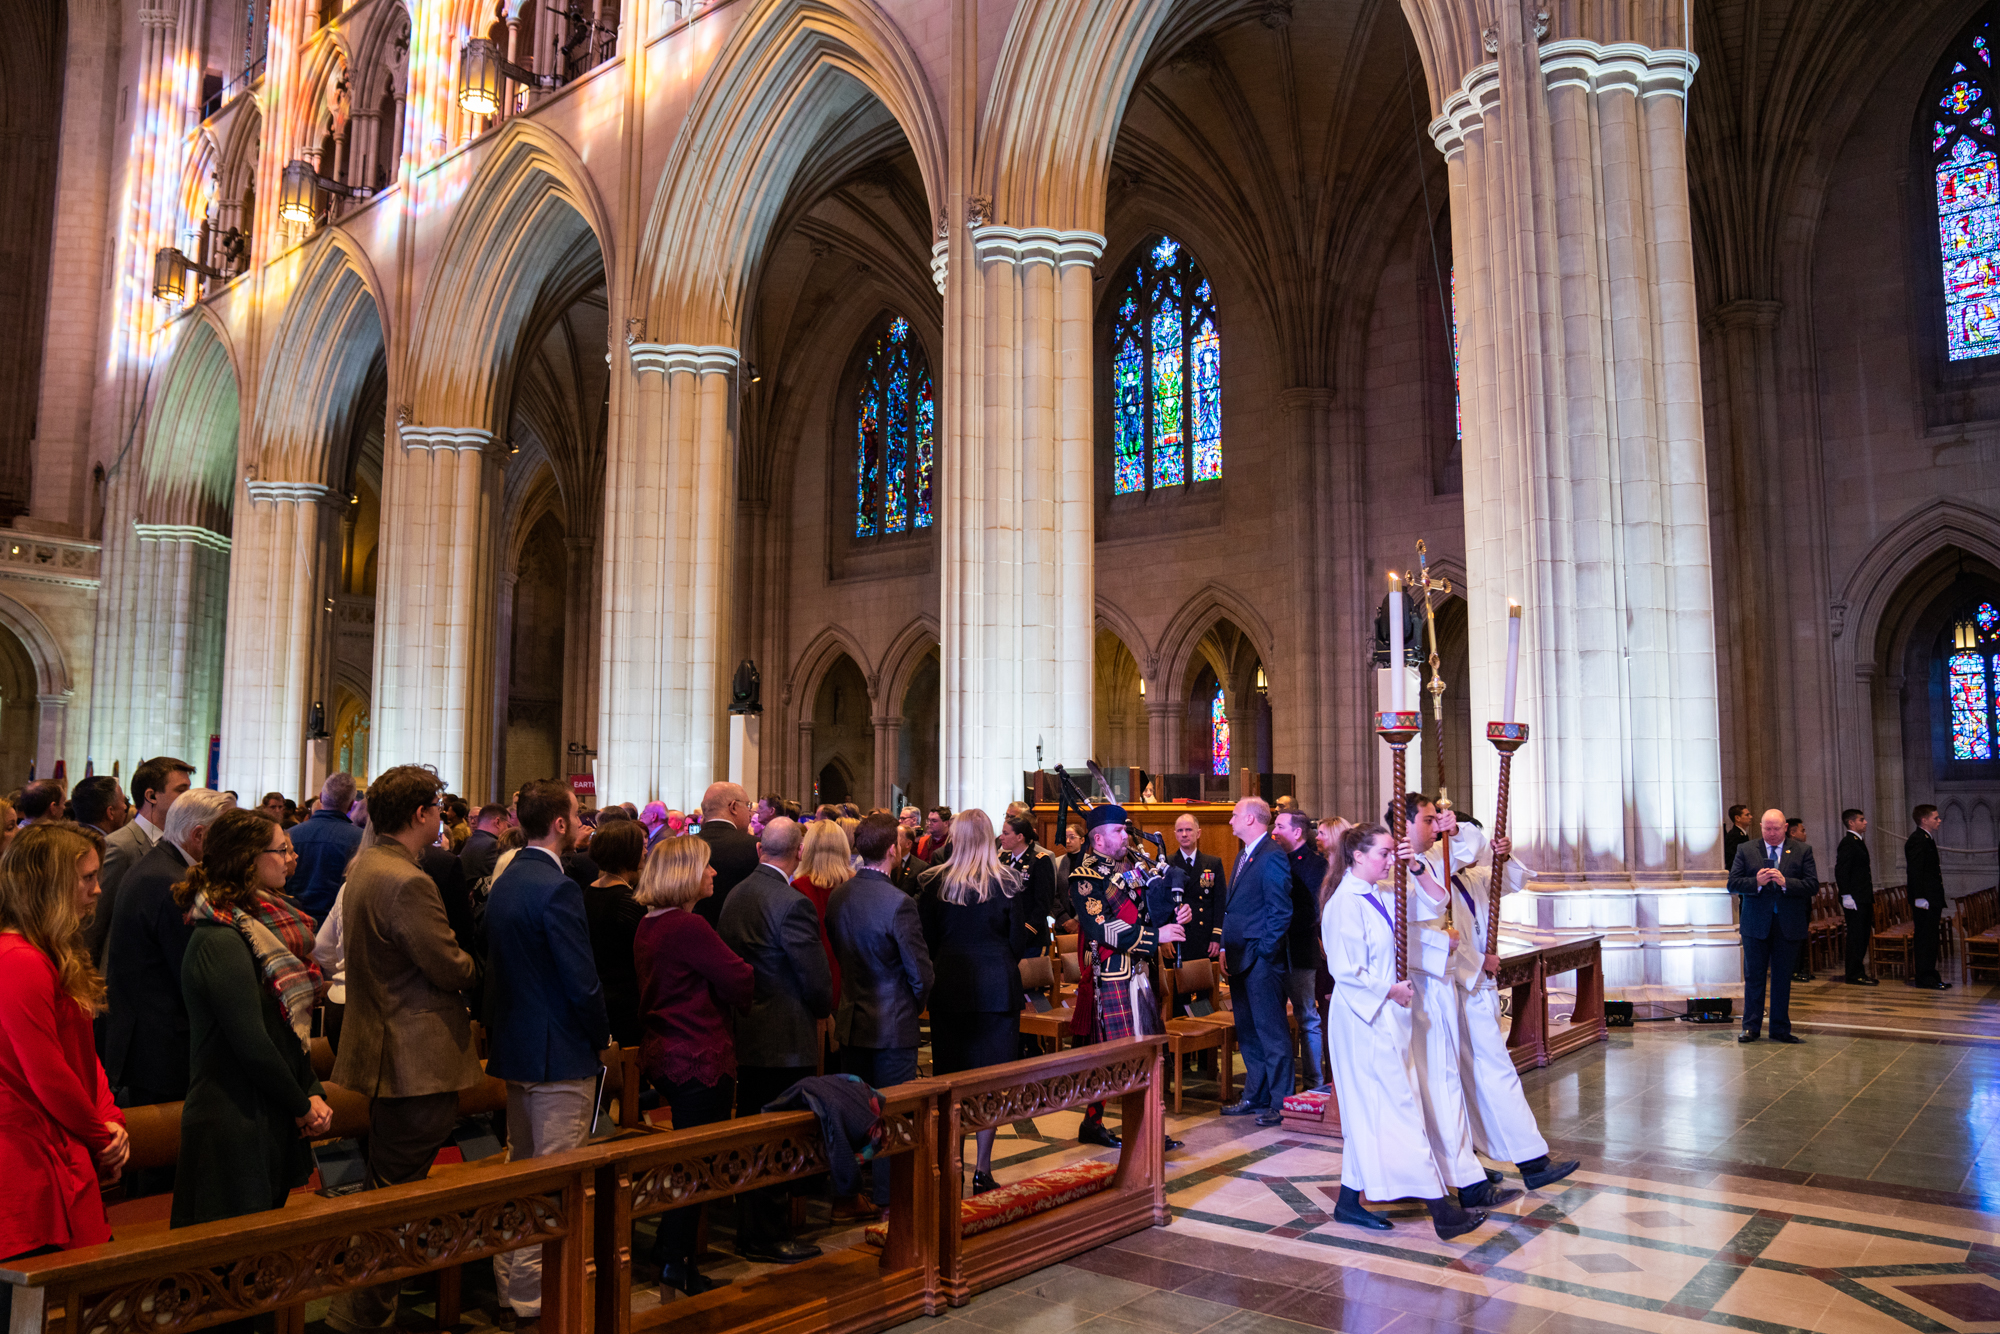  The procession through the cathedral commences the ceremony. 